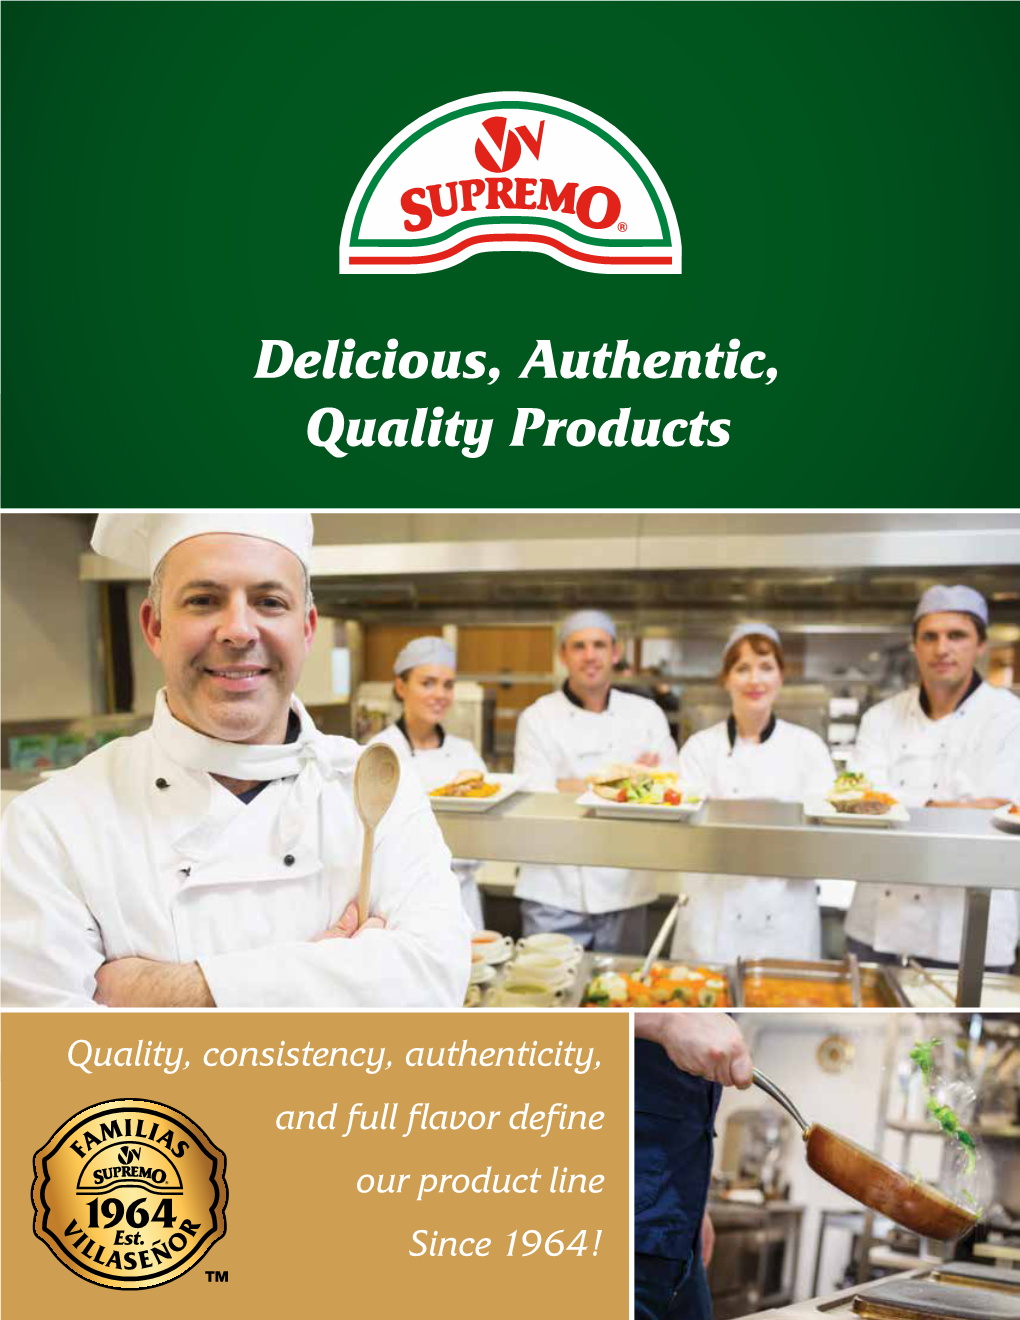 Delicious, Authentic, Quality Products